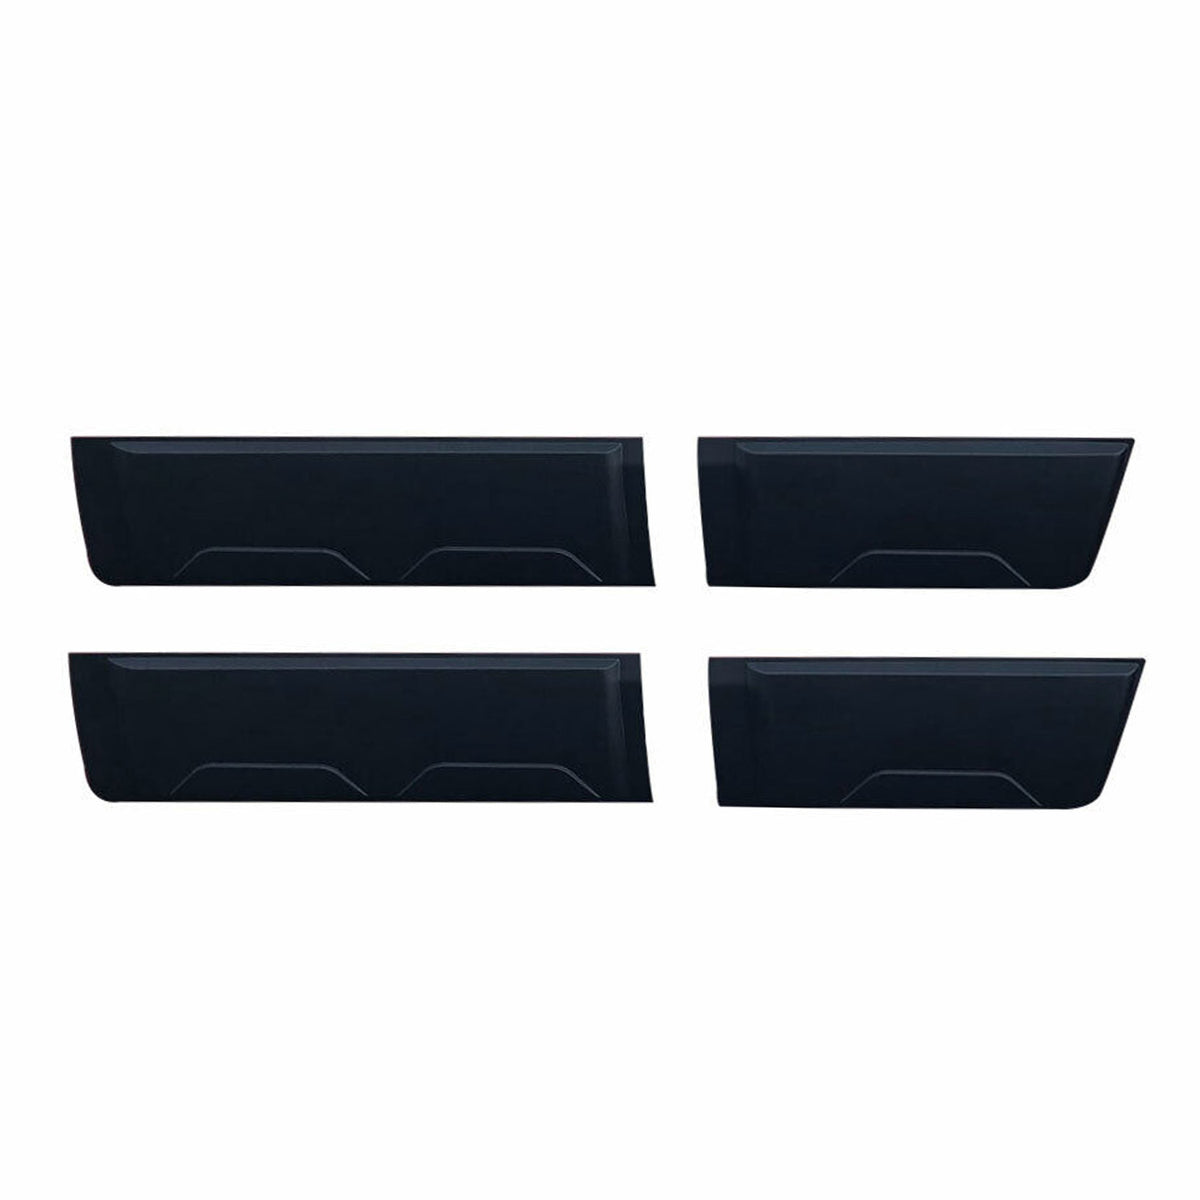 Door protection strips side protection for Mercedes X Class 2017-2020 ABS black 4 pieces